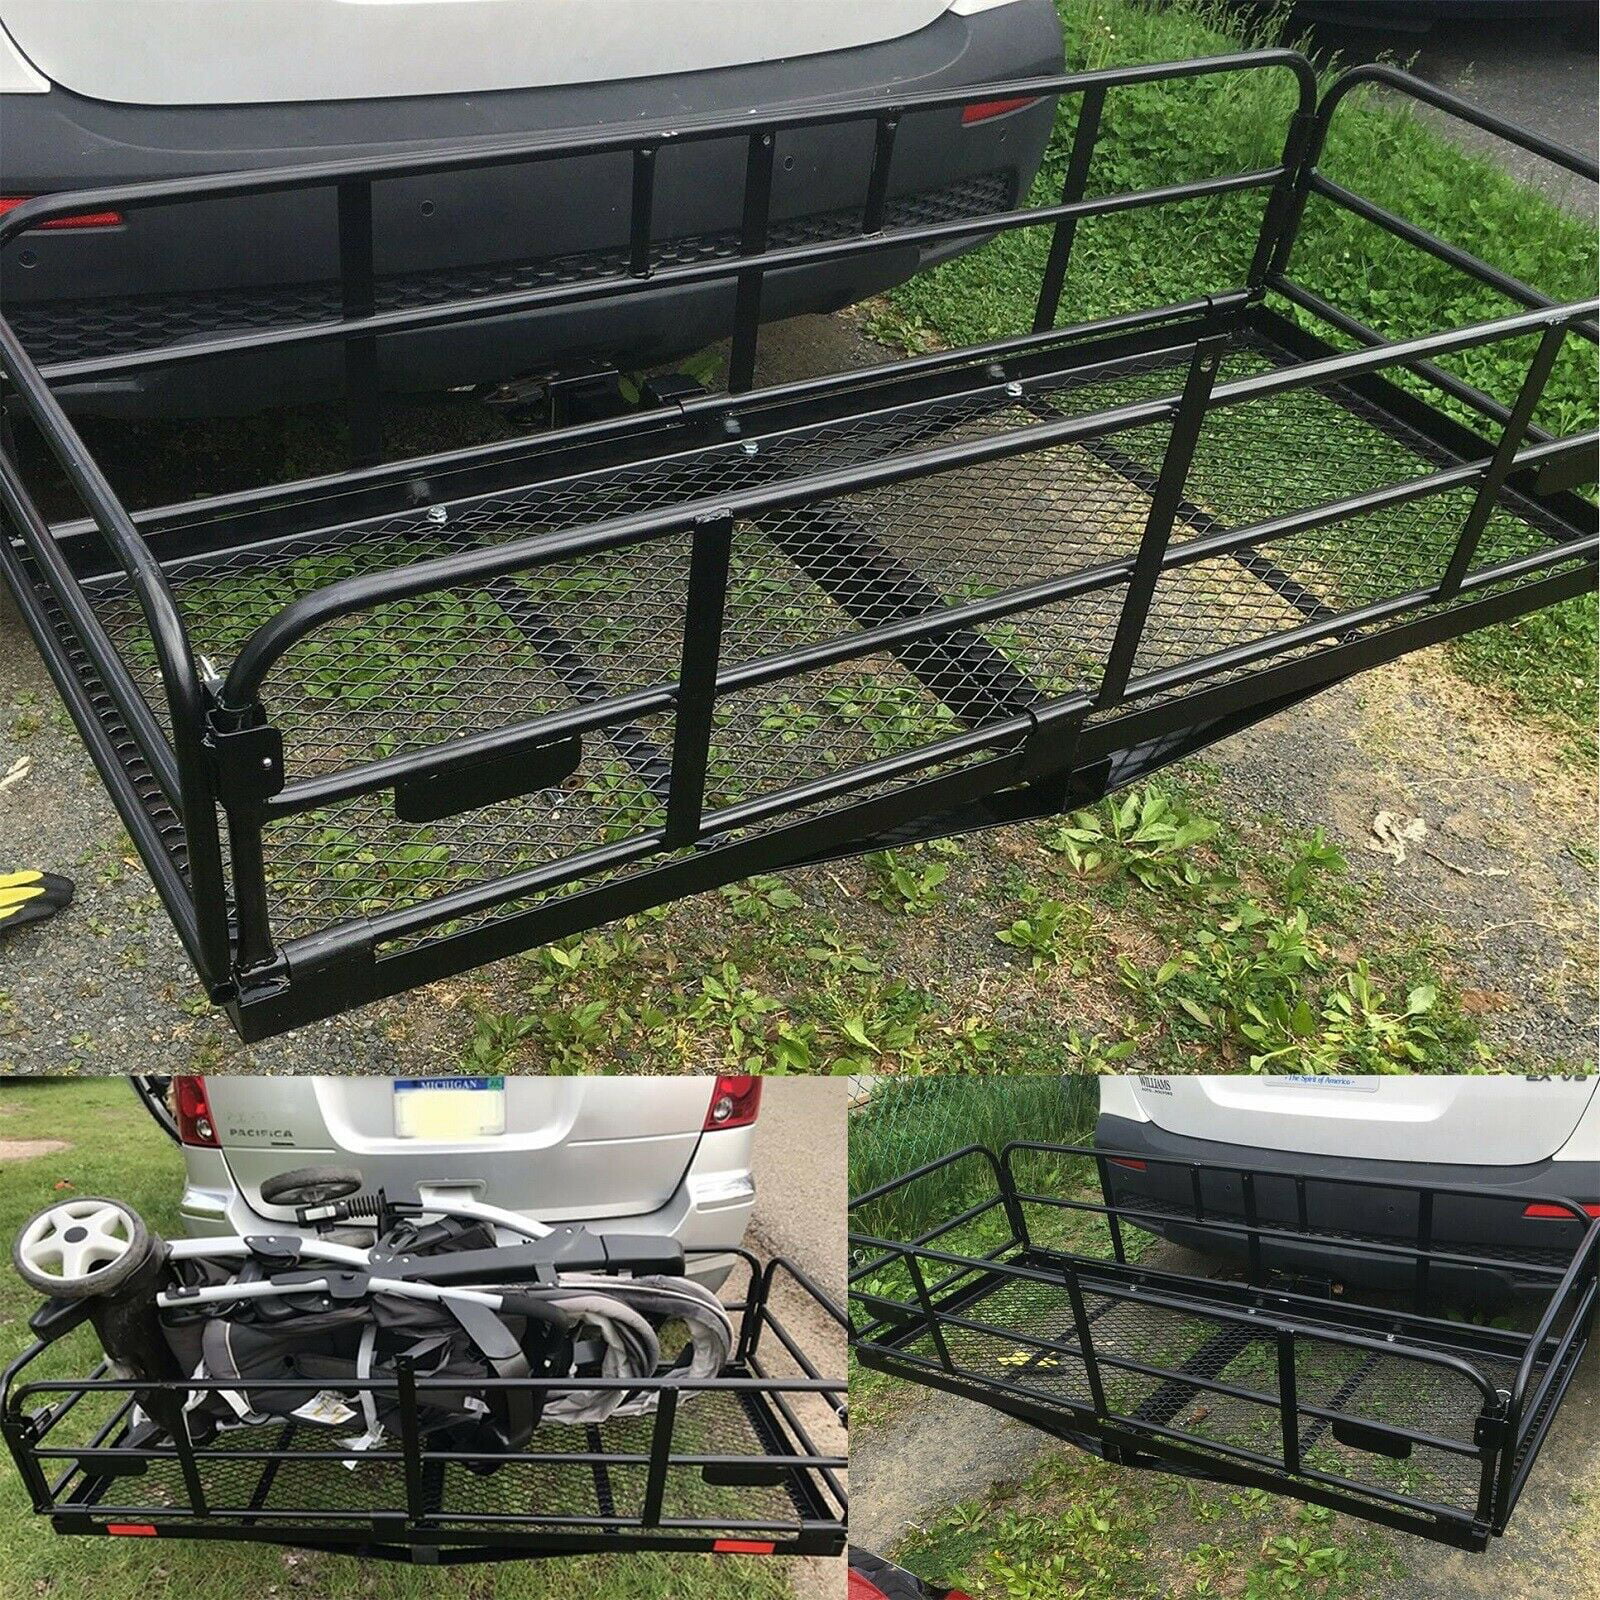 Car Truck Basket Trailer Hitch Cargo Carrier 60x 21 Folding Trailer Hitch Luggage Rack with Cargo Bag and Net 550 LBS Capacity Vehicle Cargo Carriers Hitch mount Fit 2 Receiver for SUV 